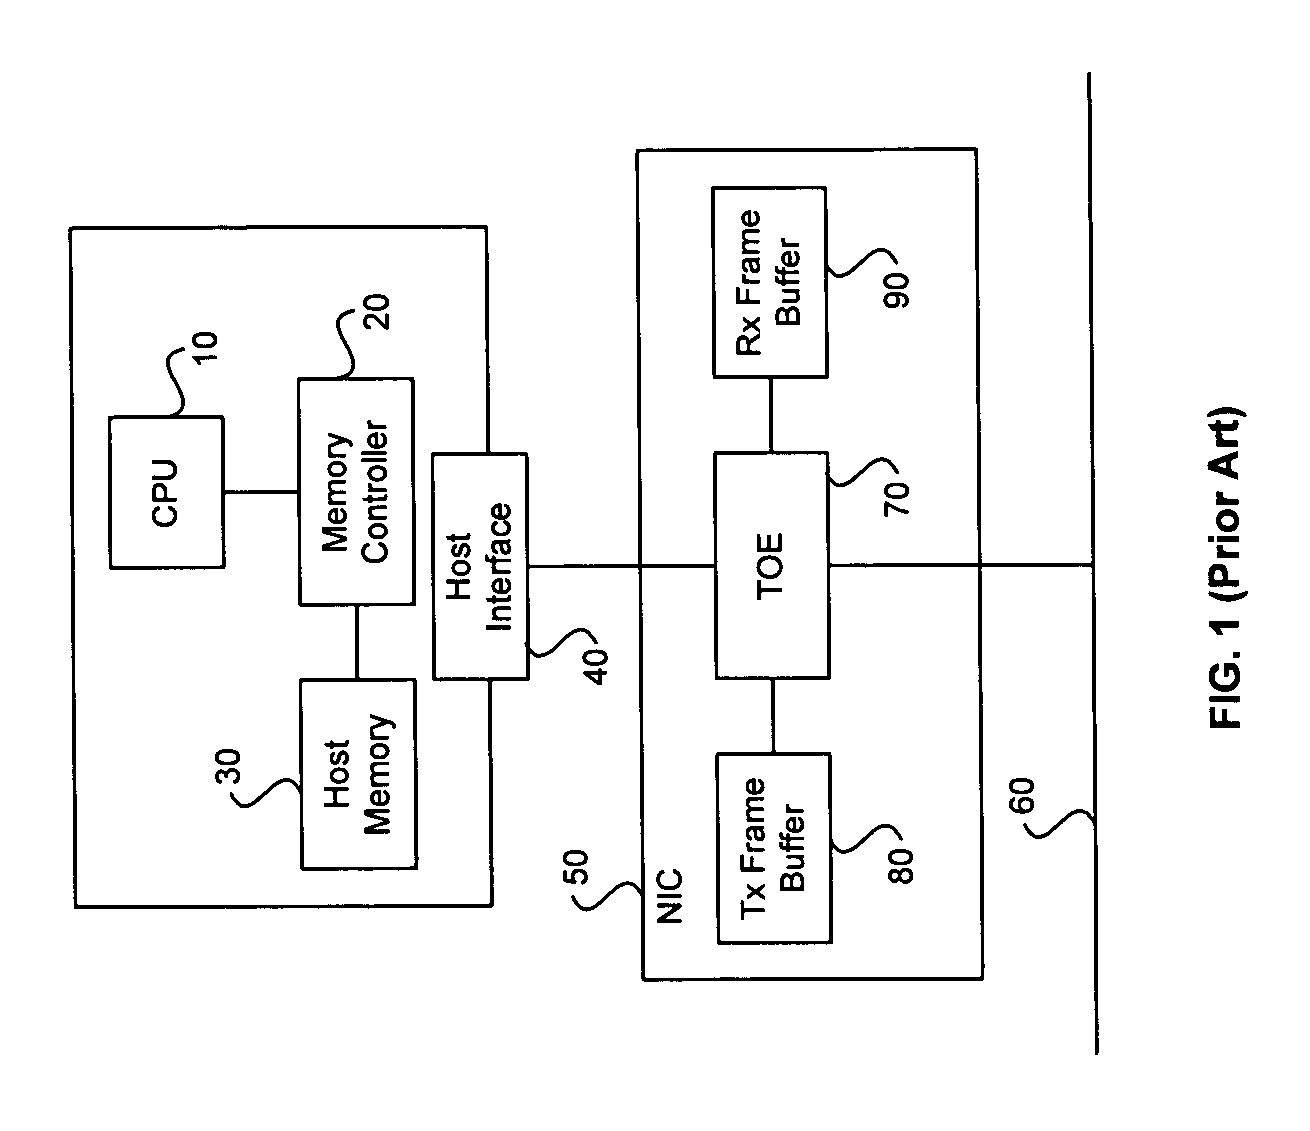 System and method for TCP offload